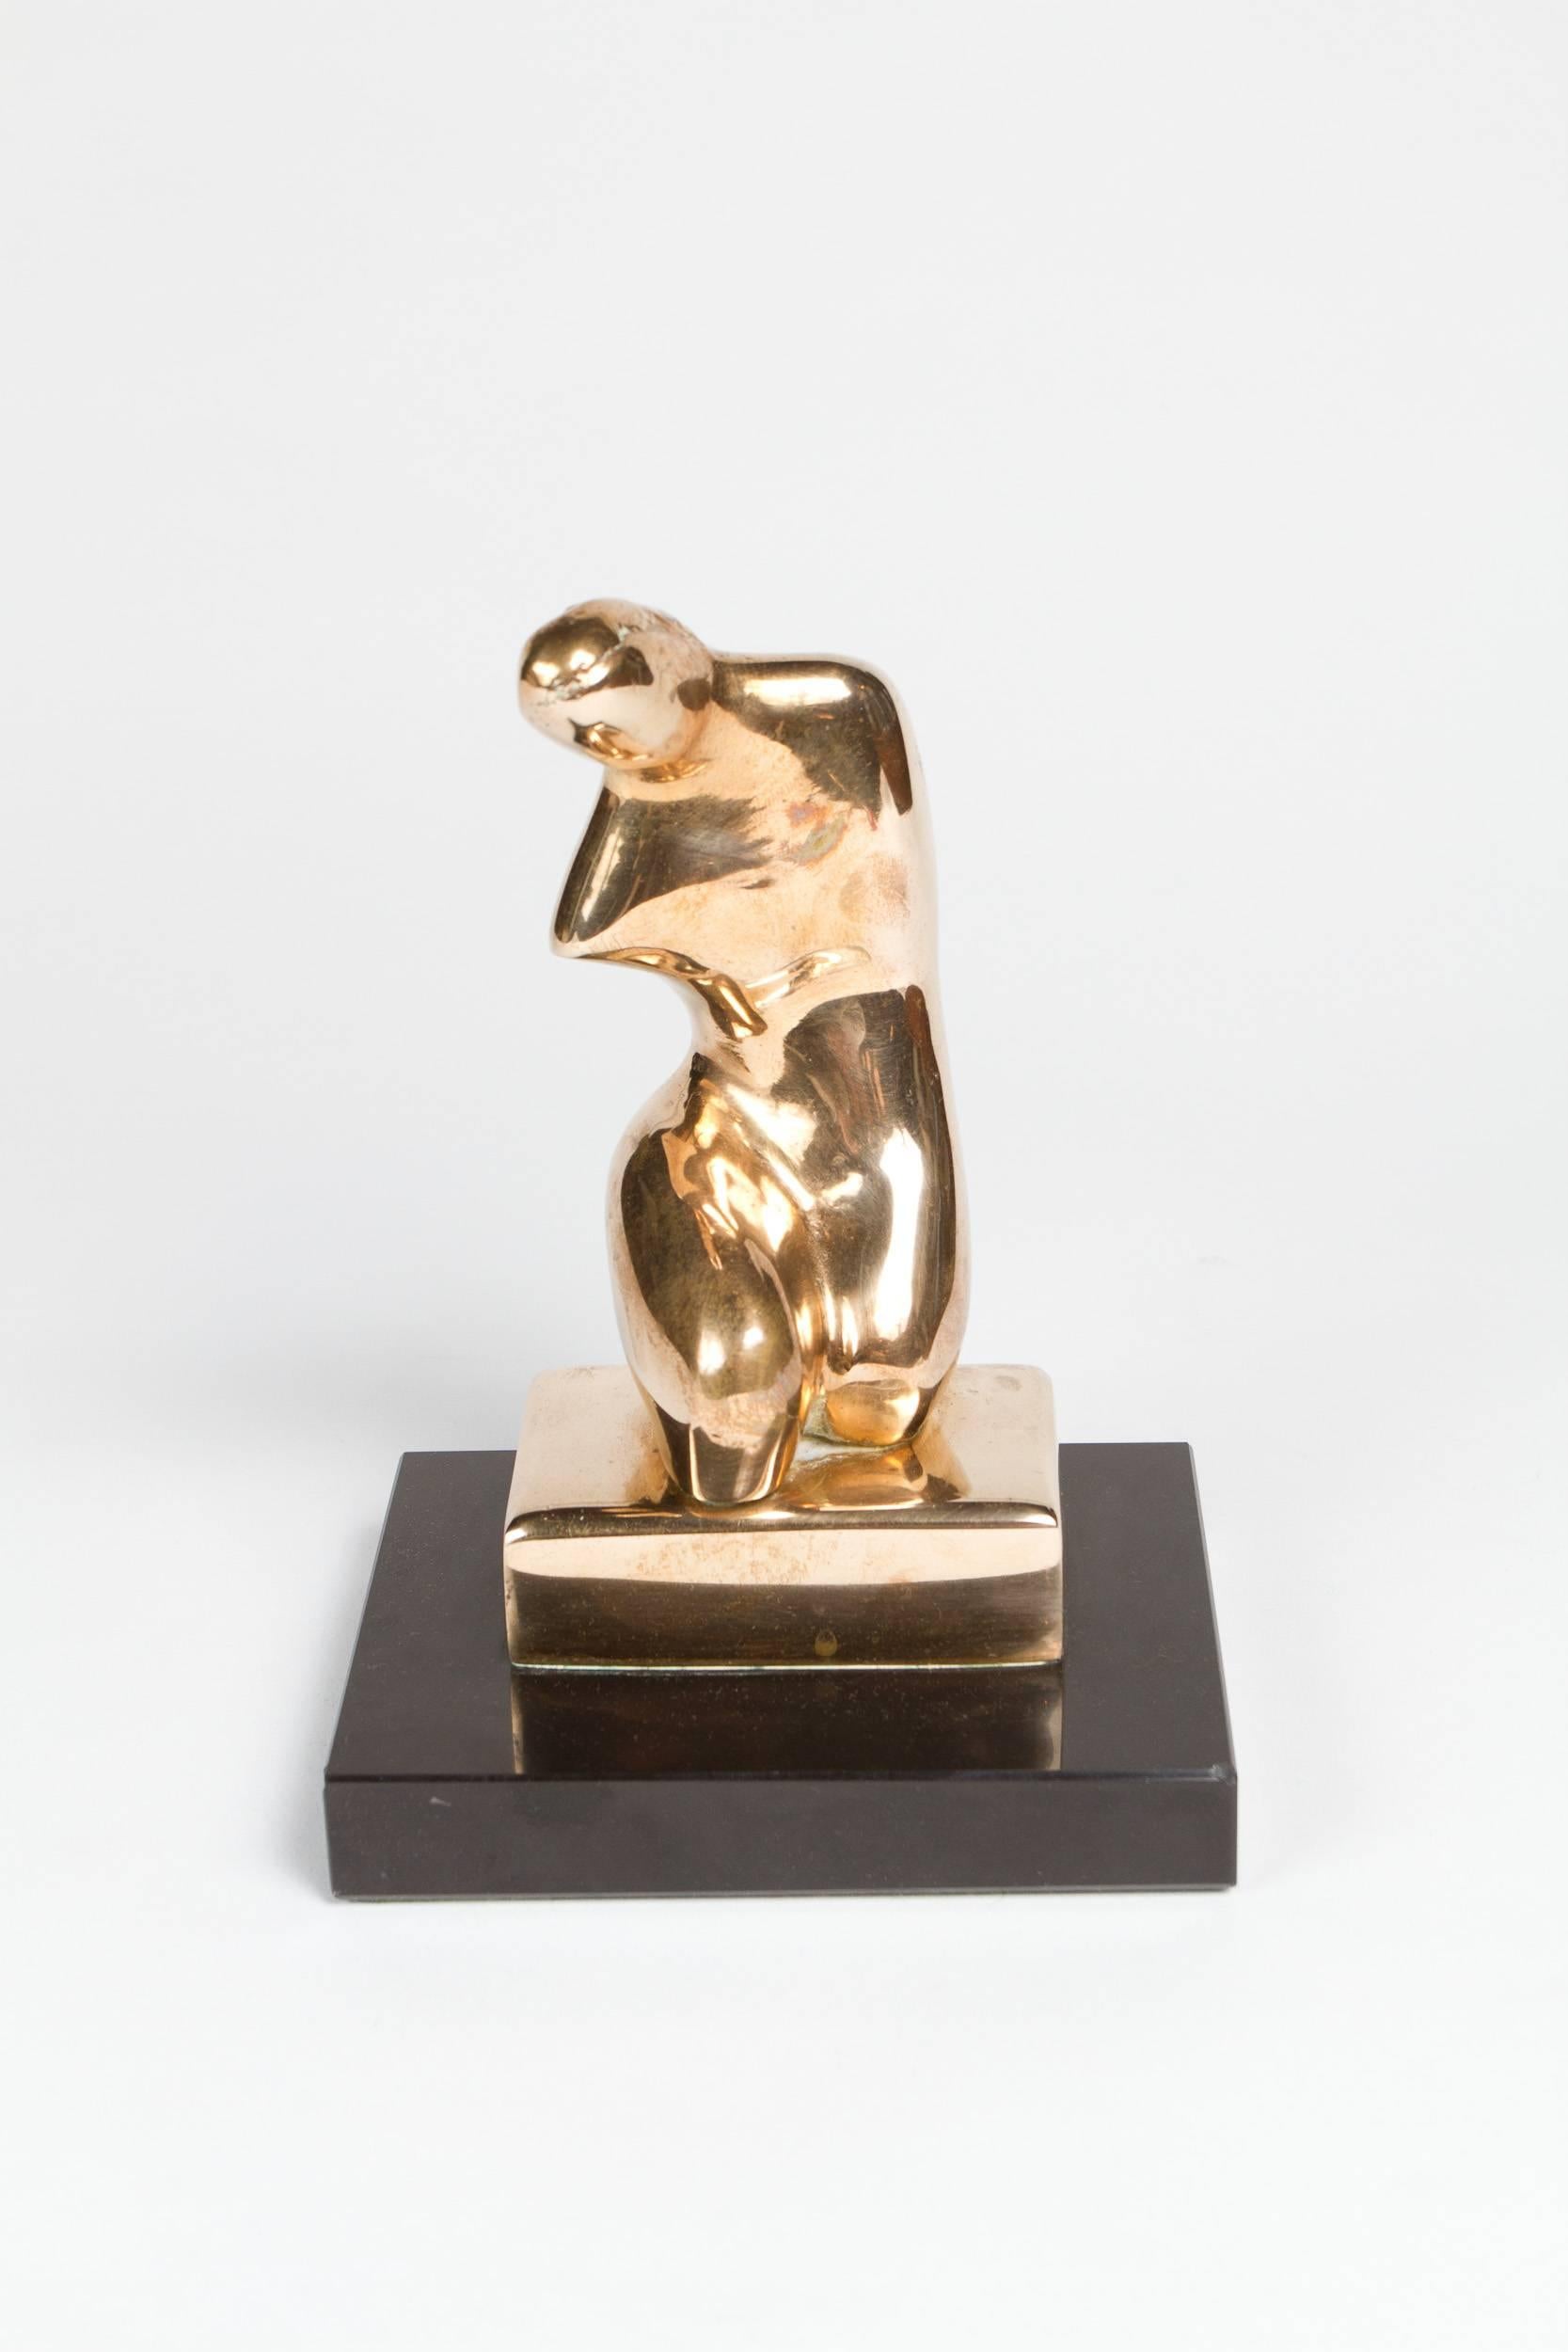 Polished bronze abstract sculpture of a kneeling woman. Signed: L S 1.